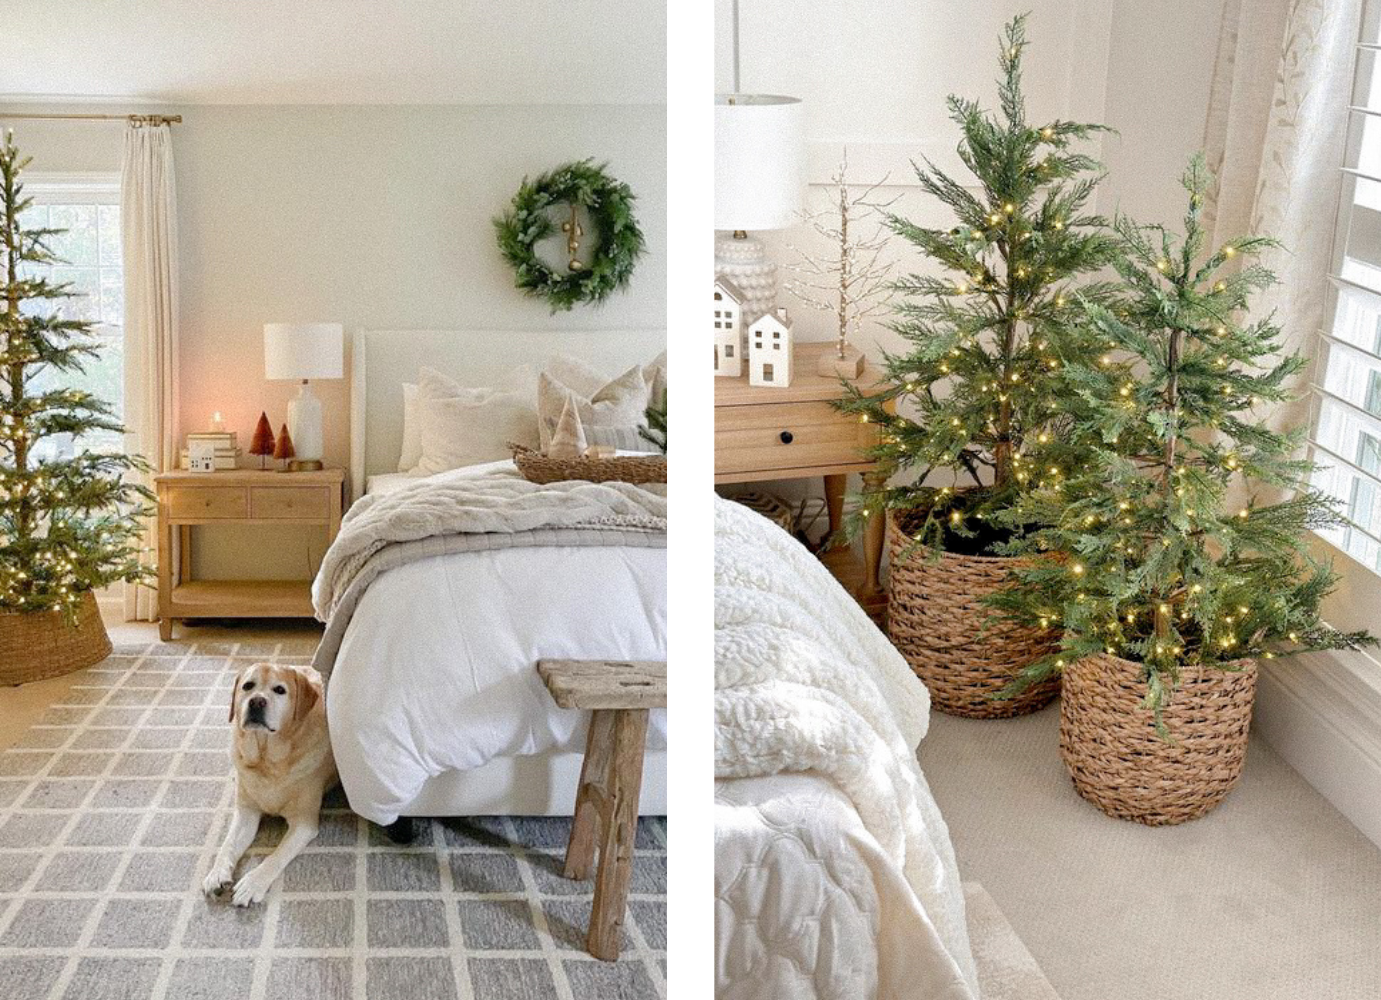 Winter decor after christmas ideas in the bedroom